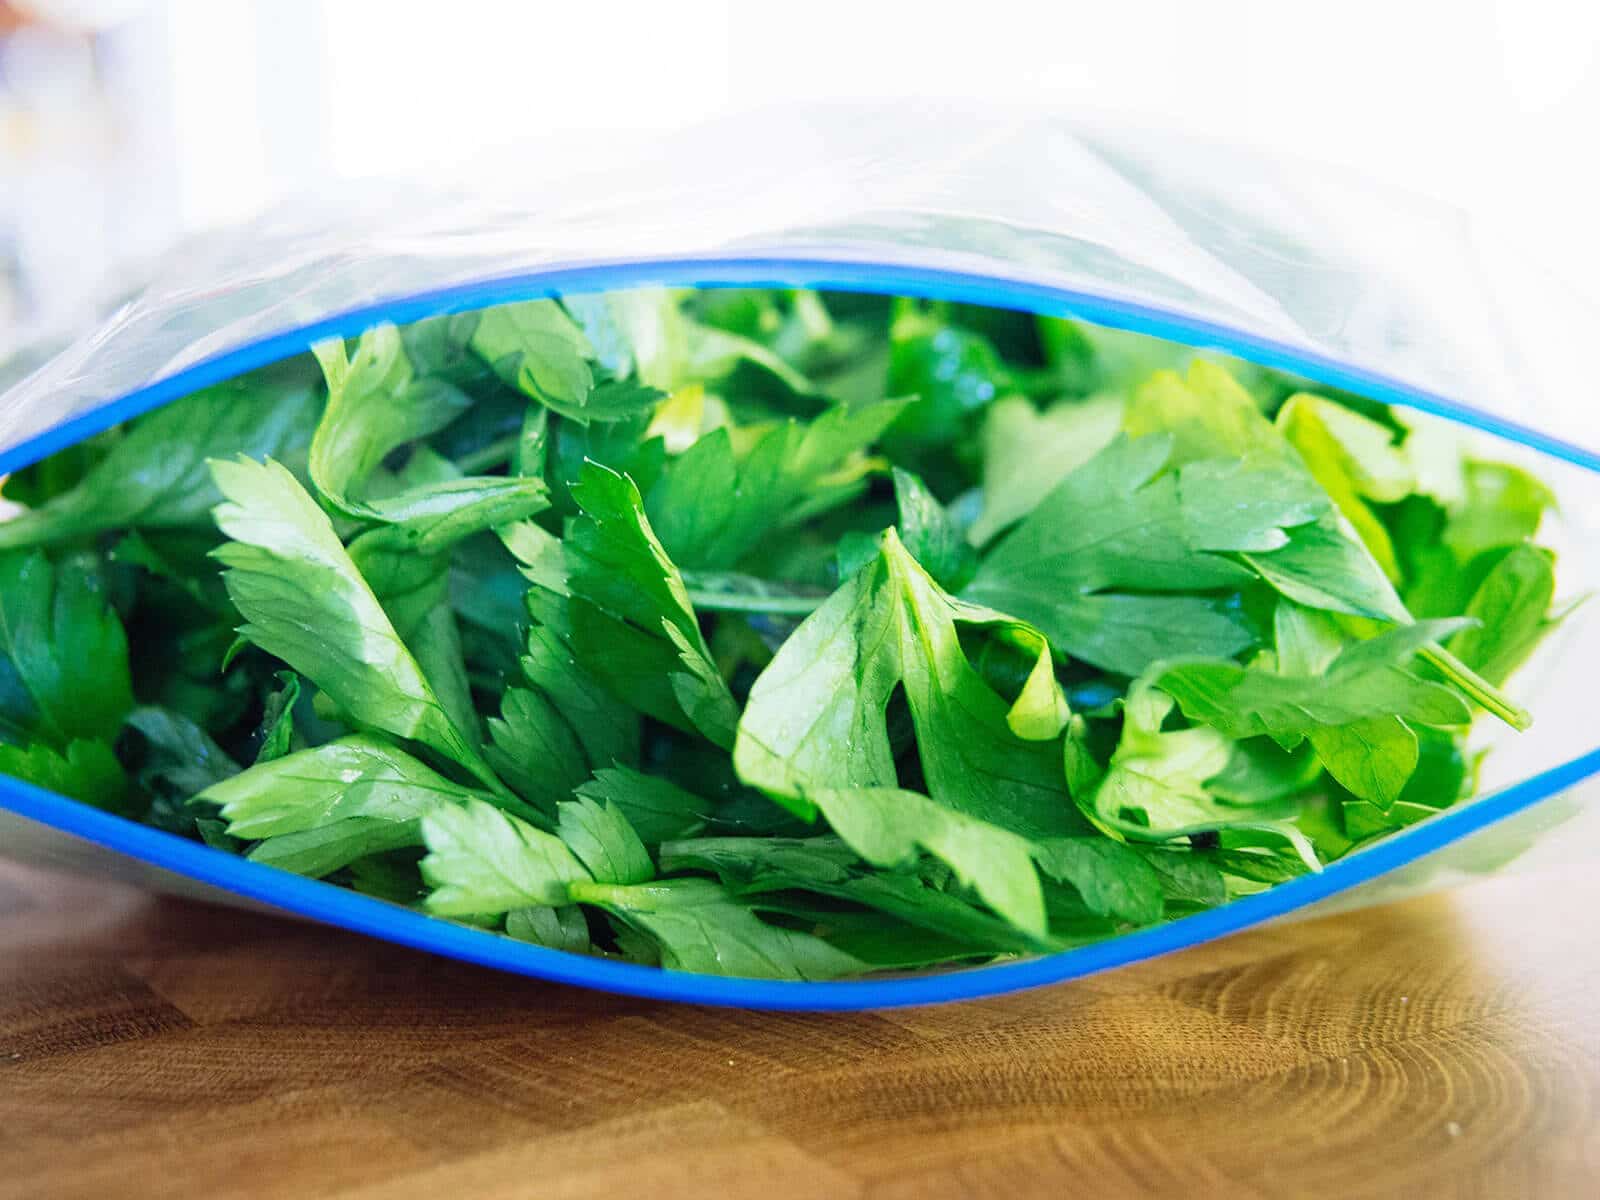 Freezer bag stuffed with parsley leaves